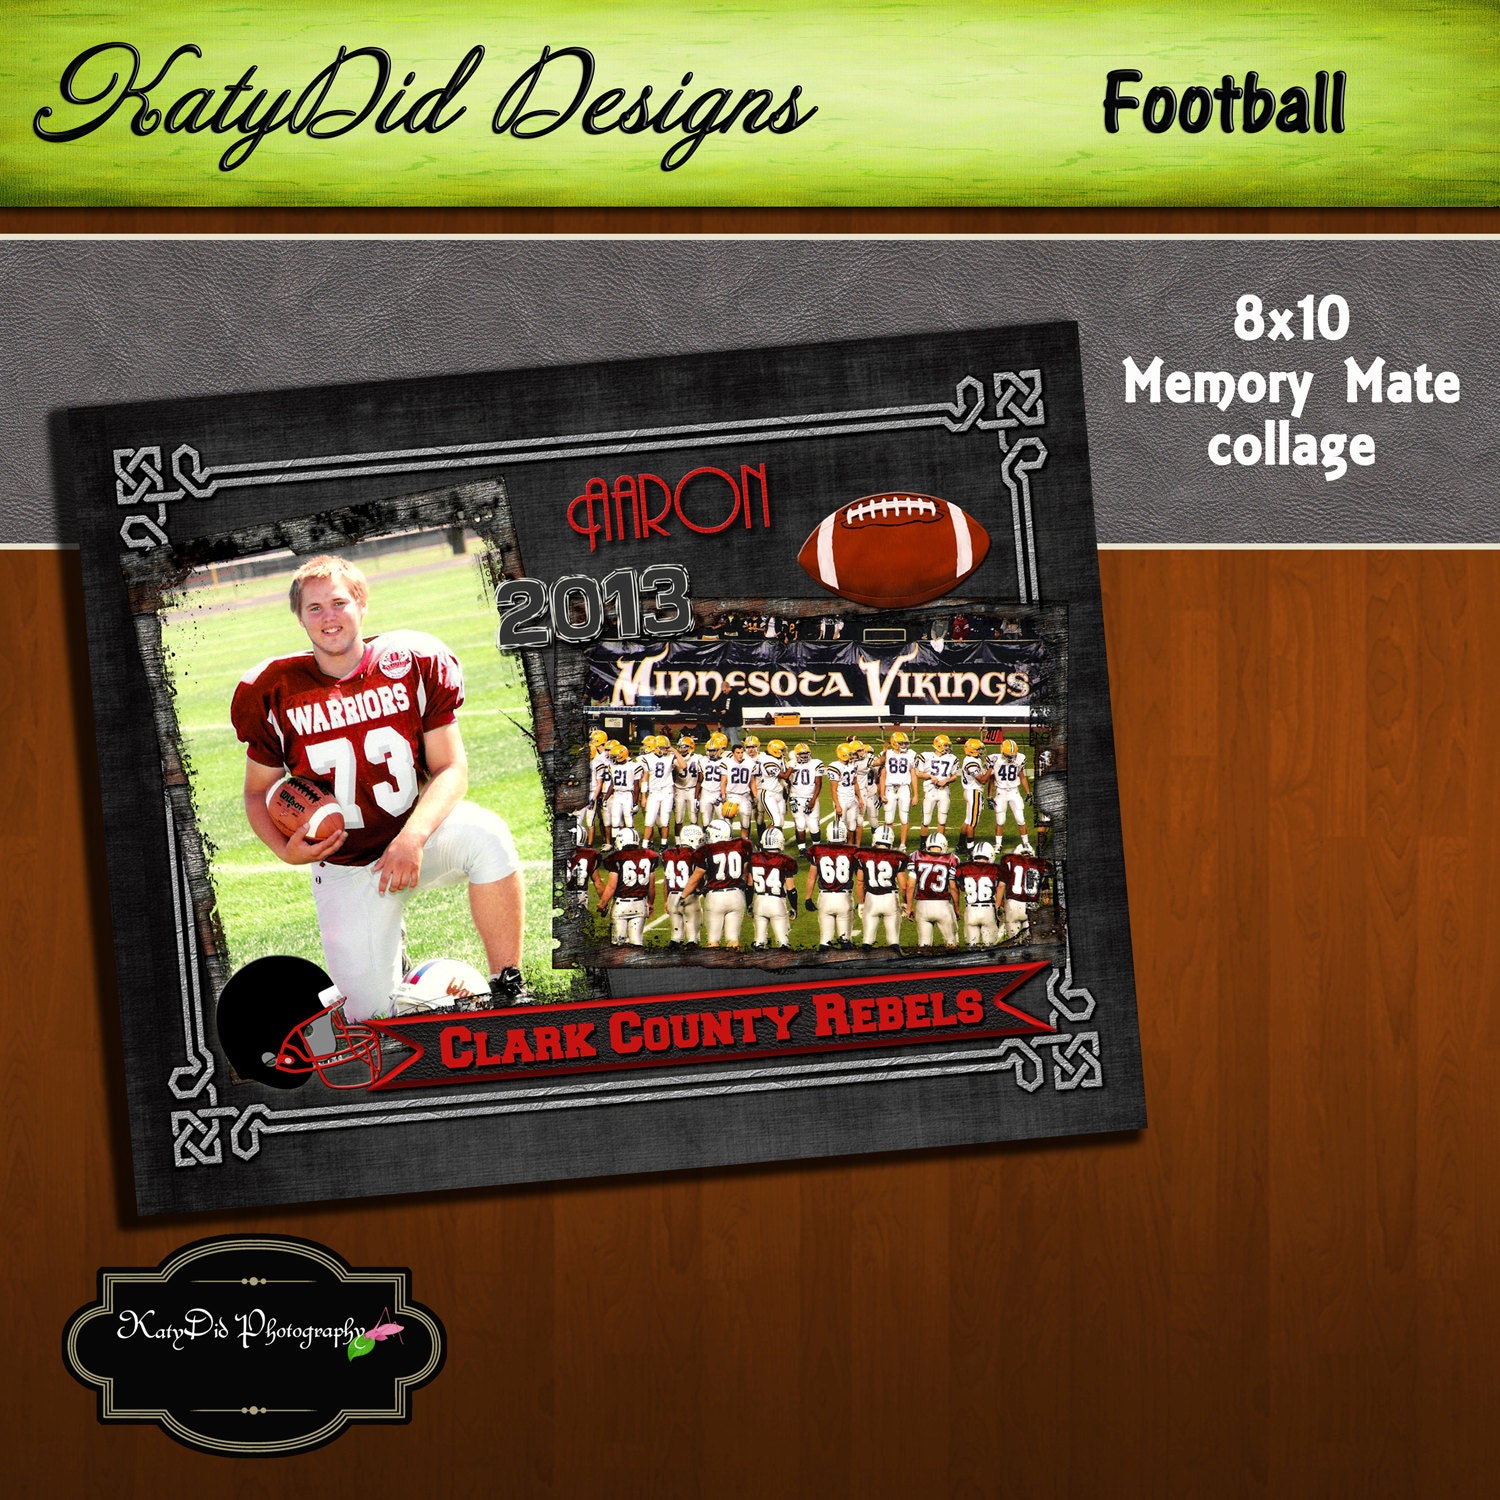 8x10 Memory Mate Touchdown Football Collage by KatyDidPhotoDesign